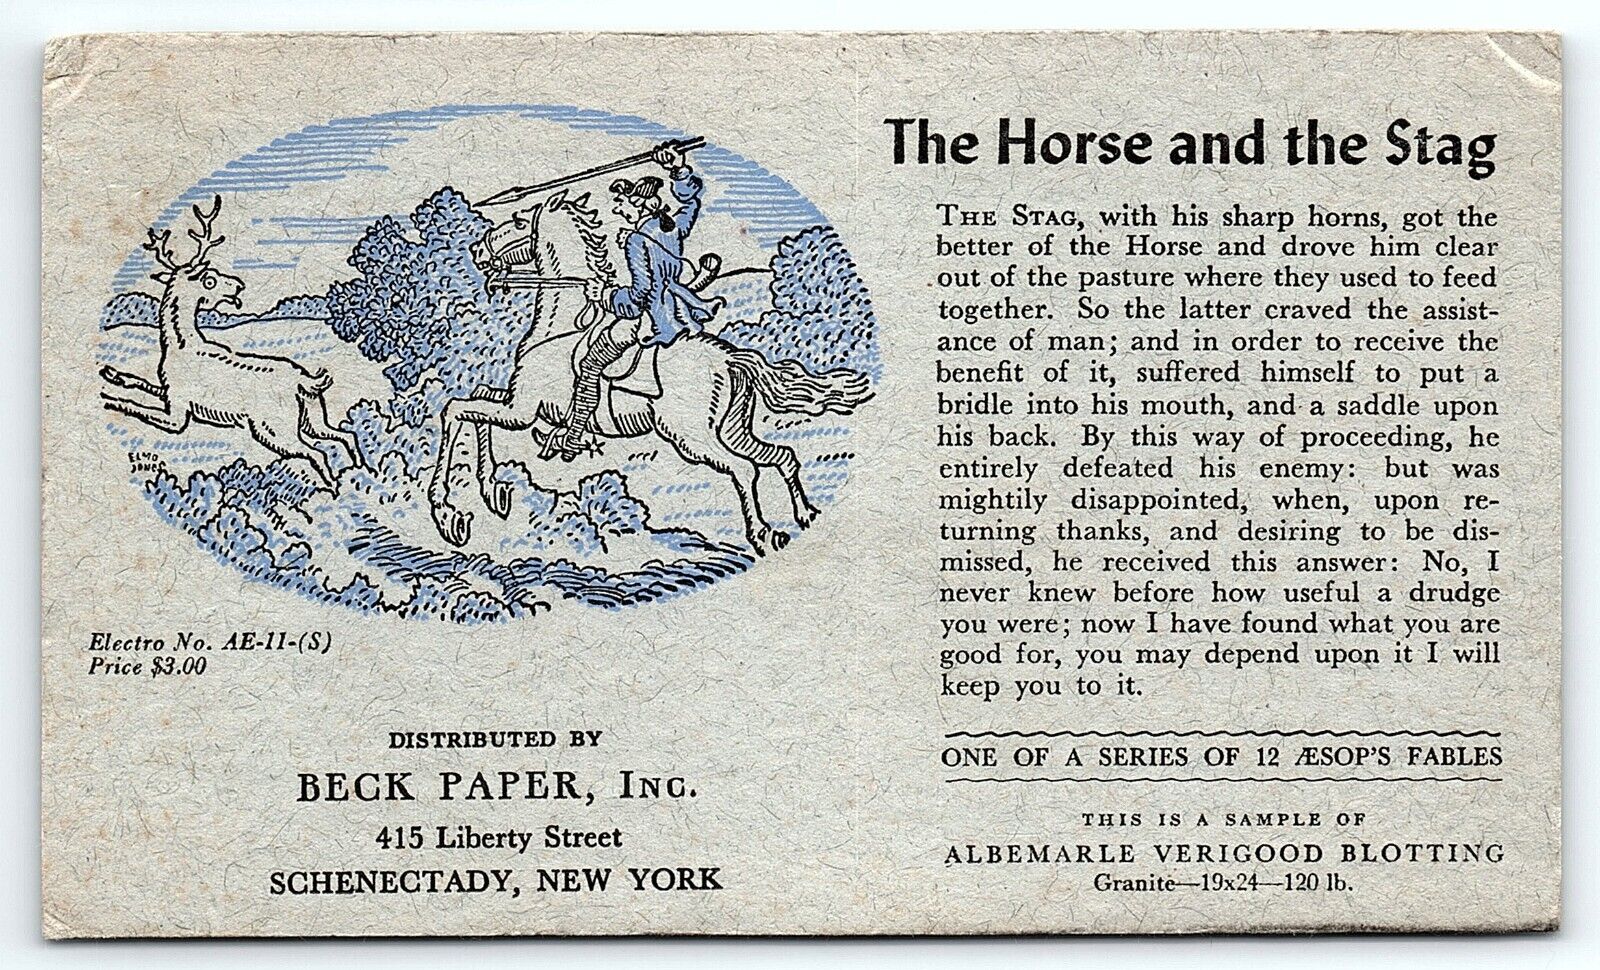 c1920 SCHENECTADY NY BECK PAPER THE HORSE AND THE STAG AD INK BLOTTER Z1466